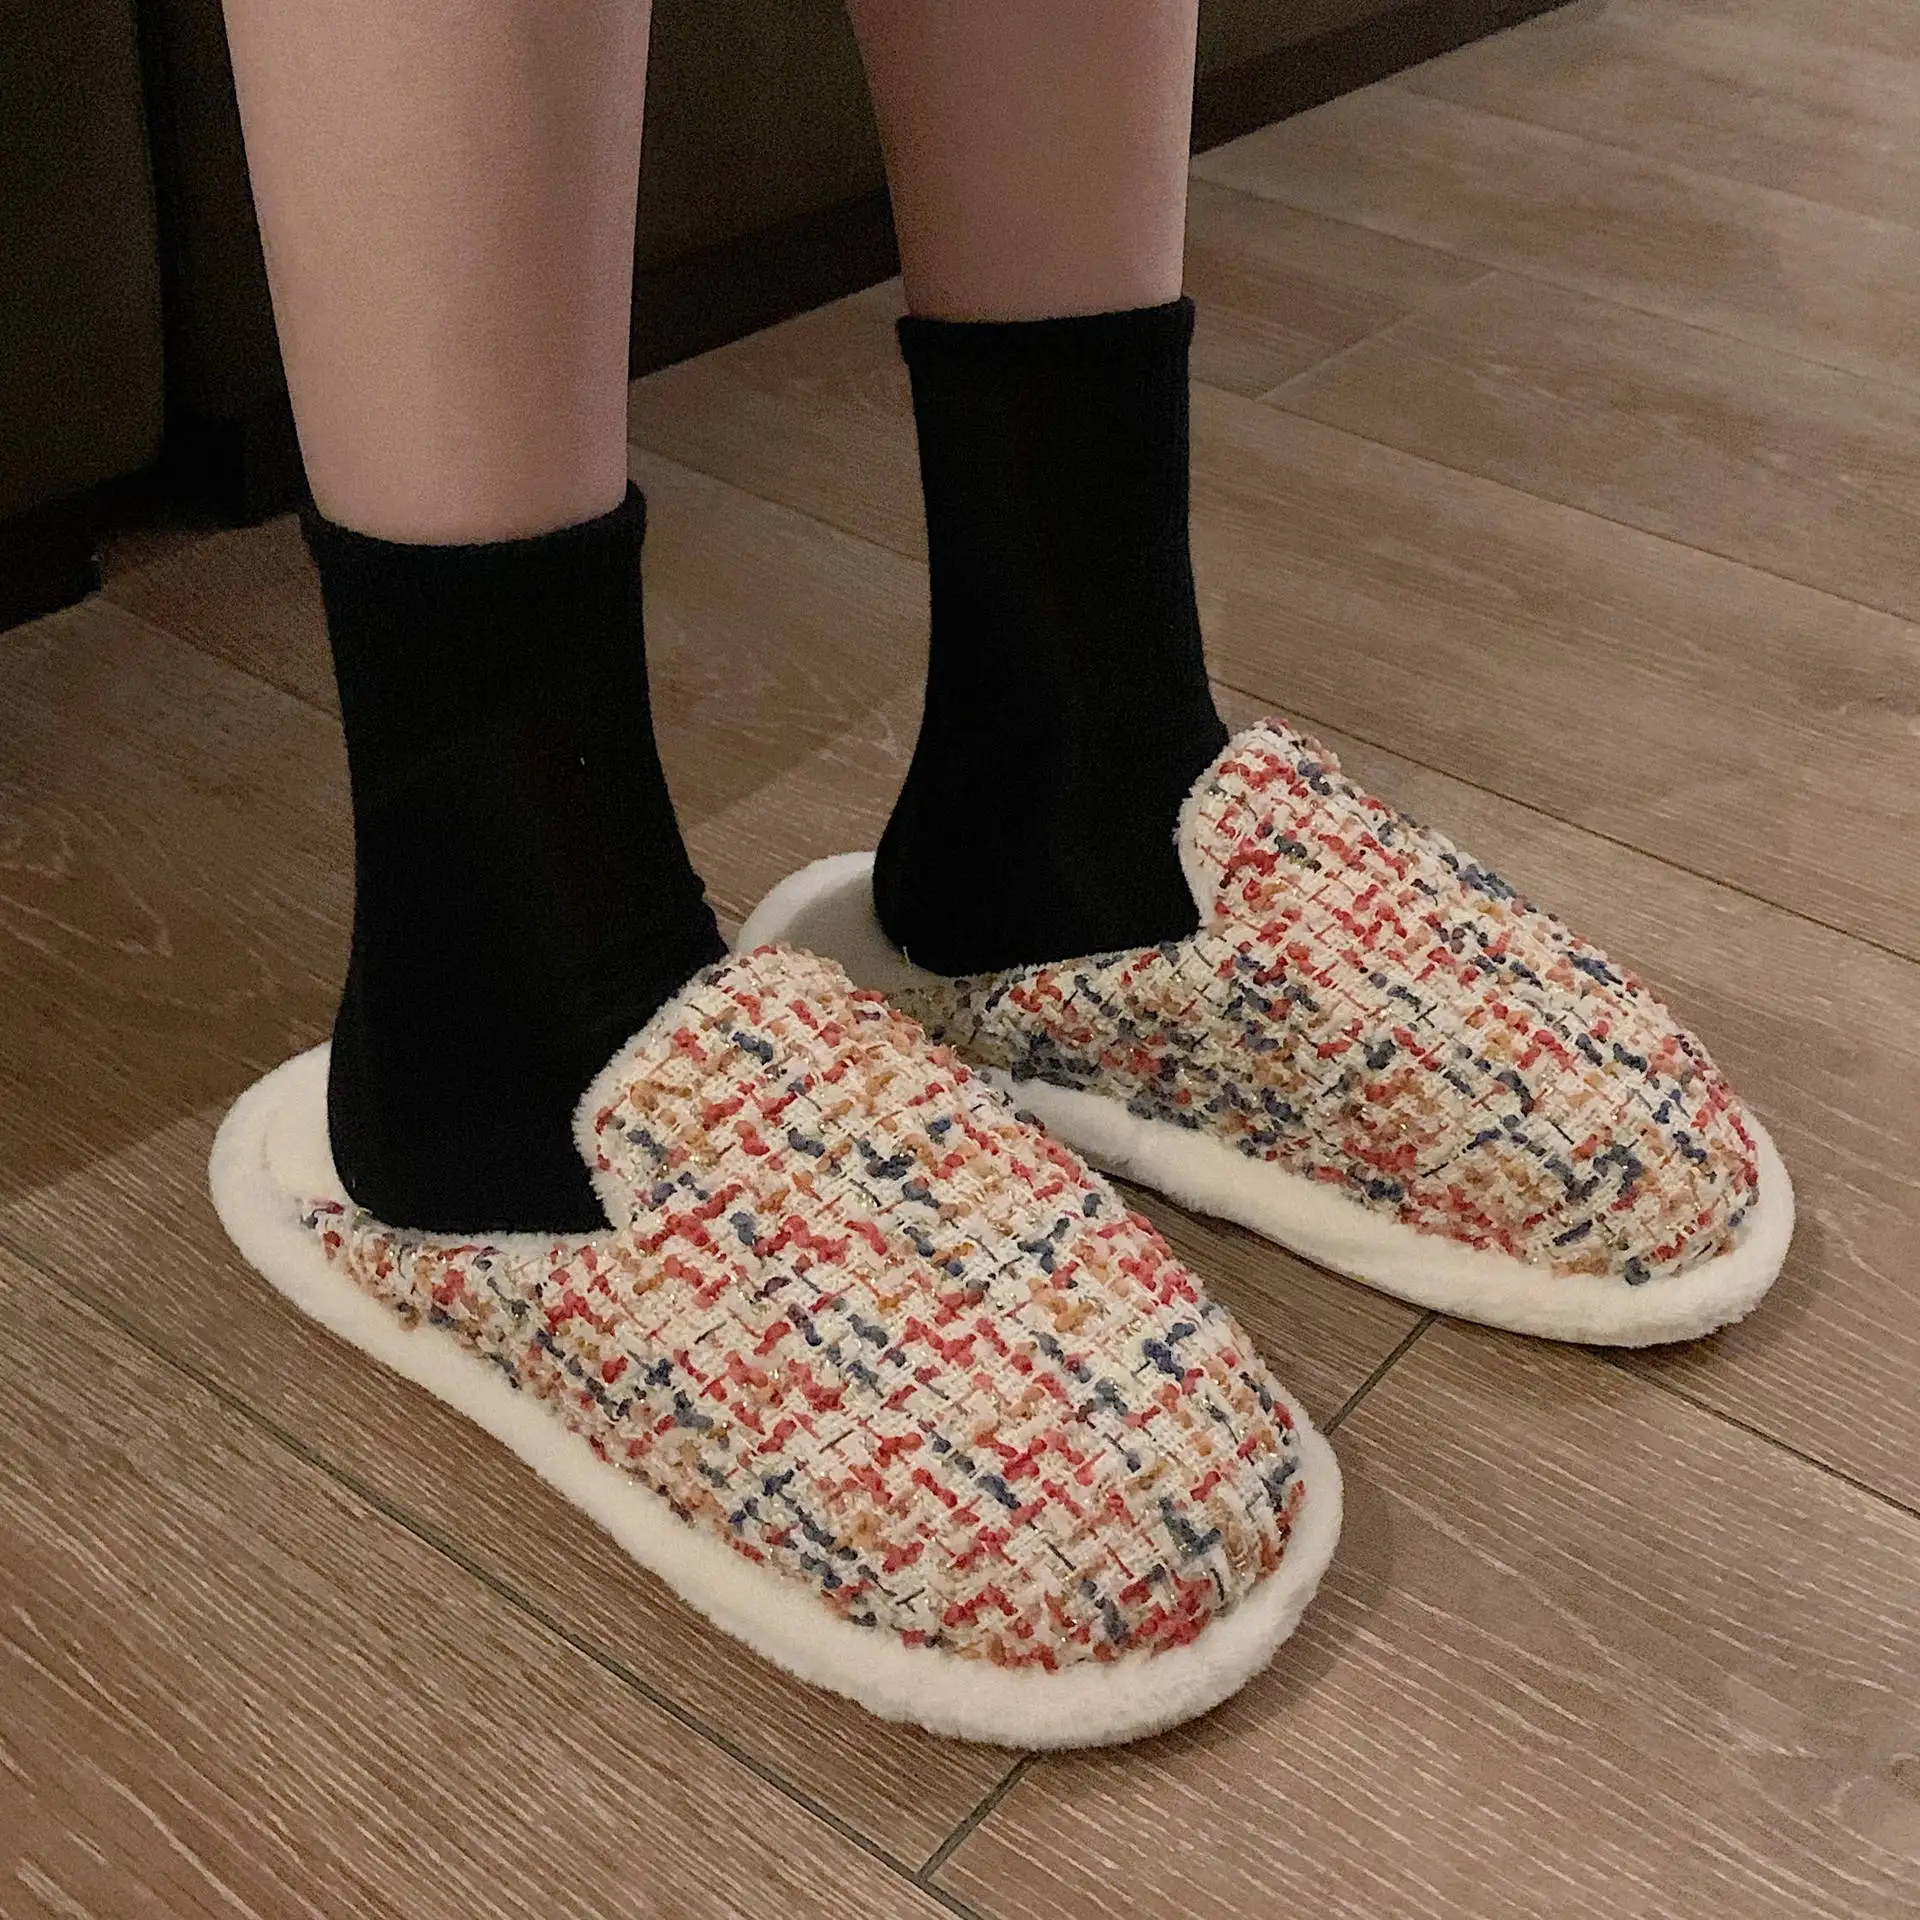 soft sole indoor slippers Winter Women Slippers Warm Indoor Thick Sole Men Home Shoes Plush Dual Purpose Shoe Light Outside Slippers best indoor outdoor slippers Indoor Slippers